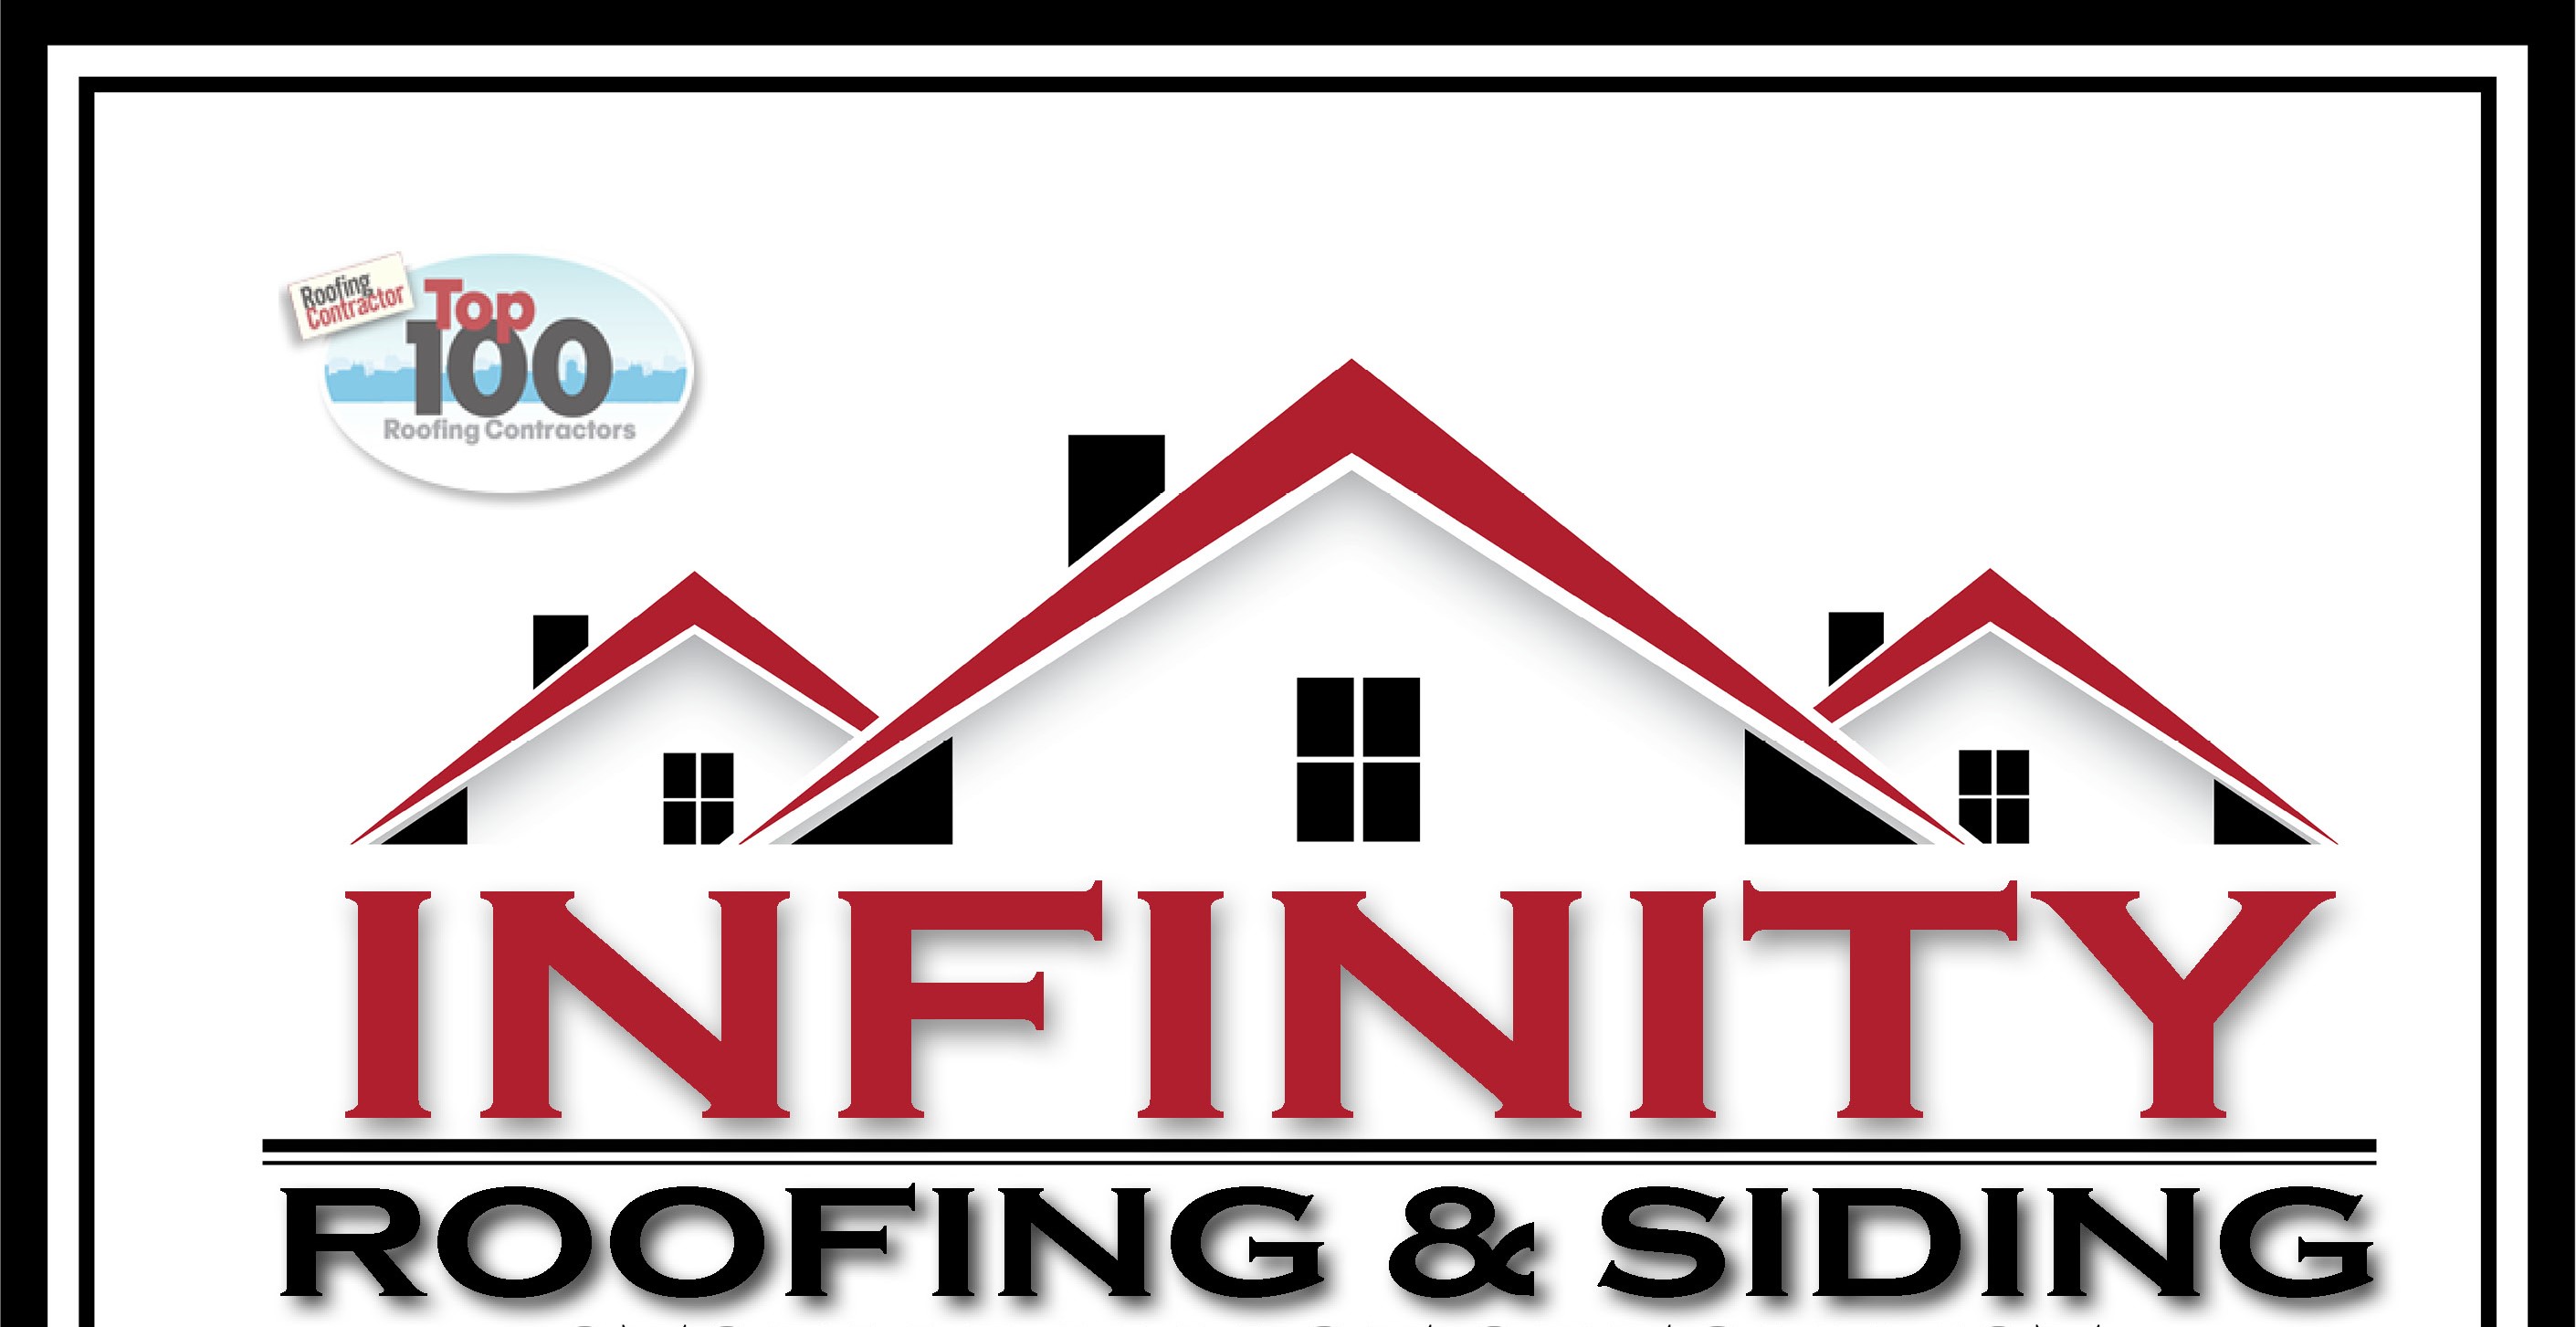 Infinity Roofing & Construction, Corp Logo